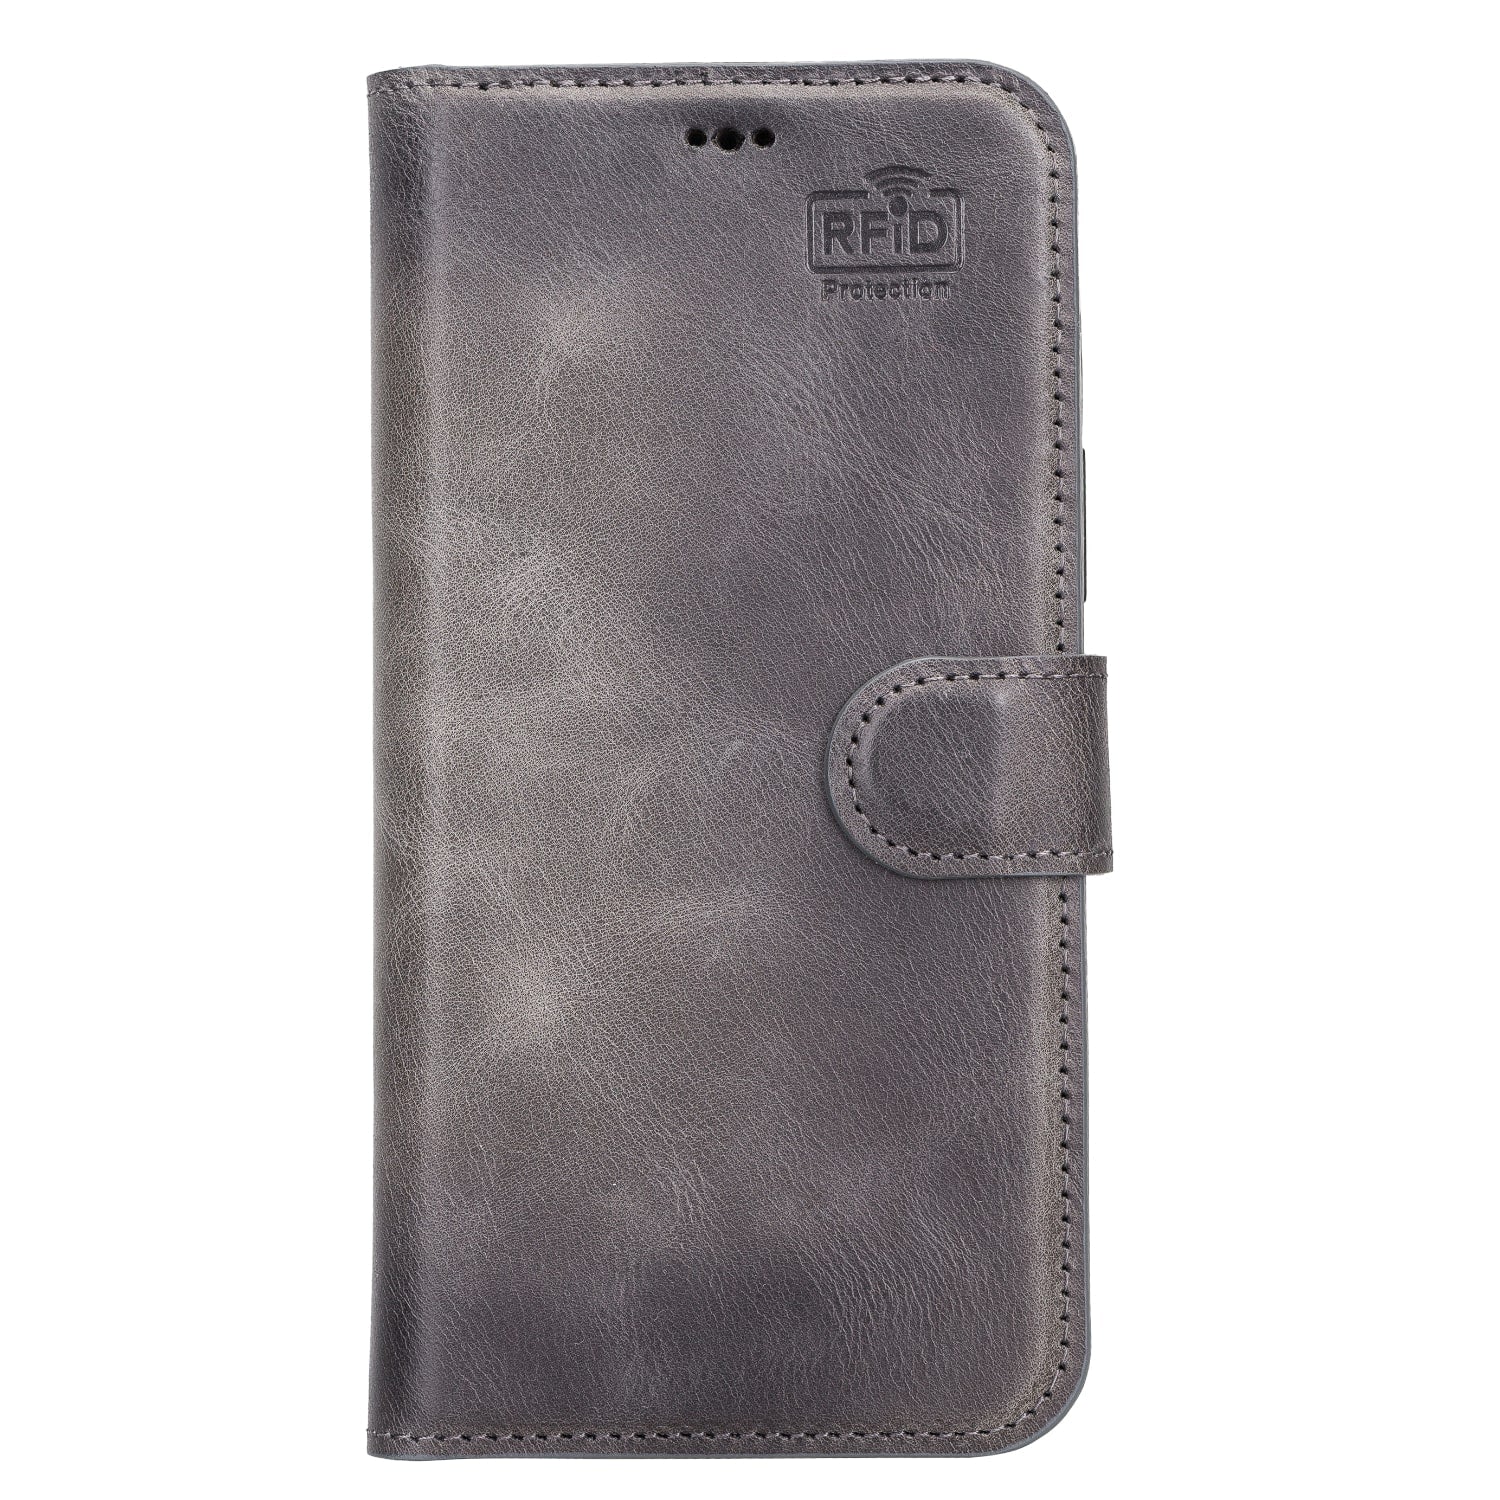 Luxury Grey Leather iPhone 13 Pro Wallet Case with MagSafe & RFID Card Holder - Bomonti - 5